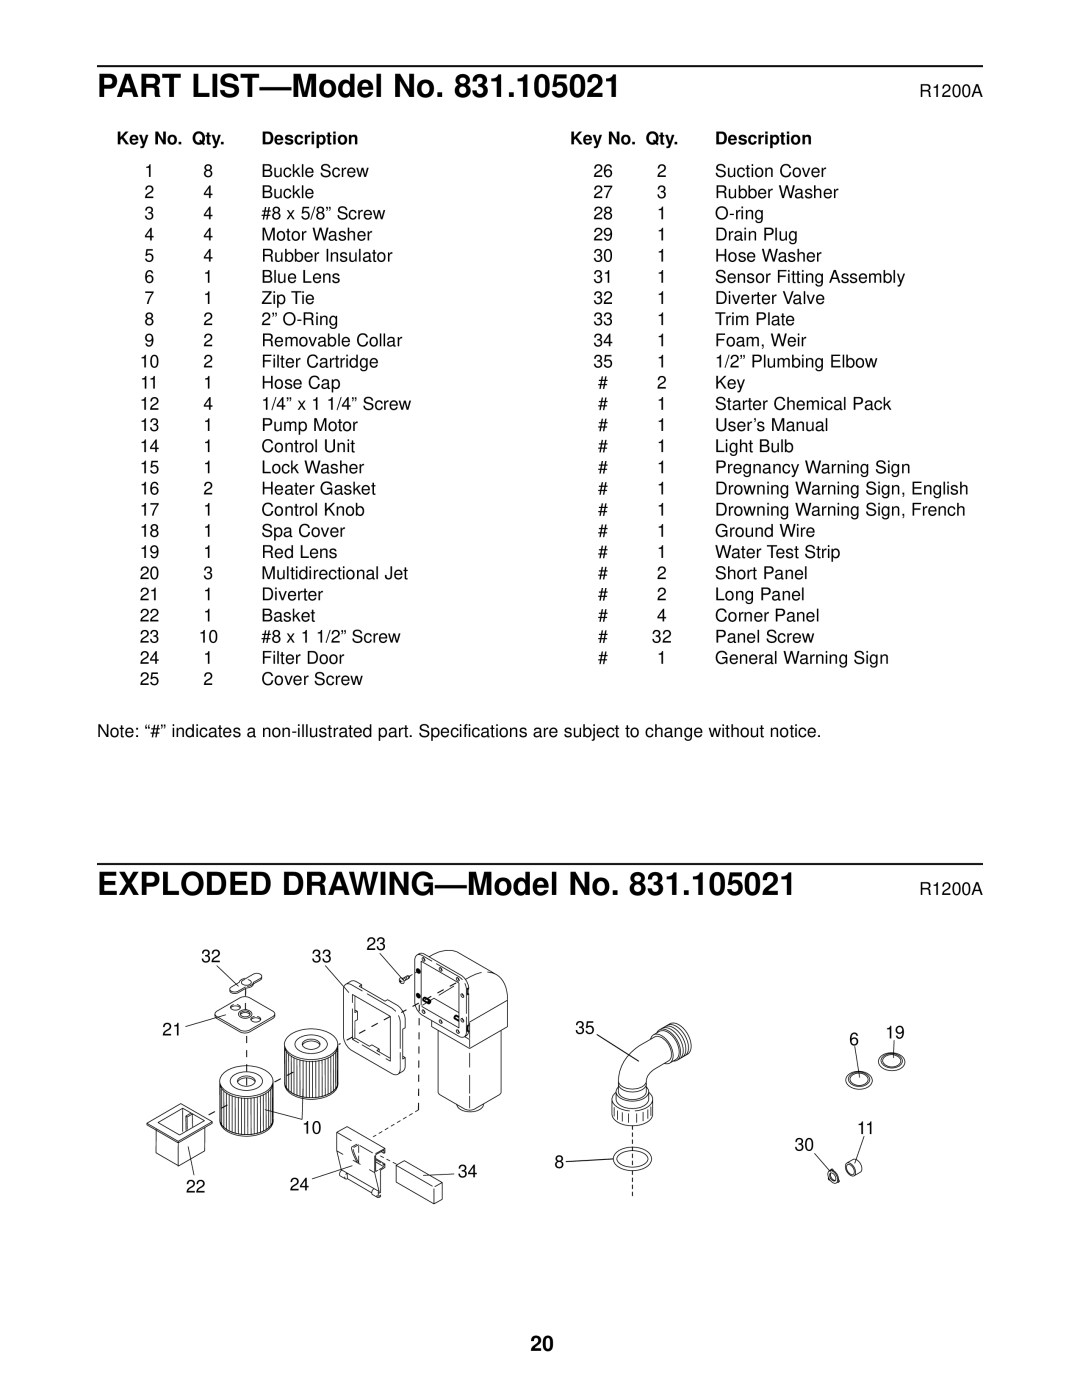 Sears 831.105021 user manual EXPLODED DRAWING-ModelNo, Key No. Qty, Description, PART LIST-ModelNo 